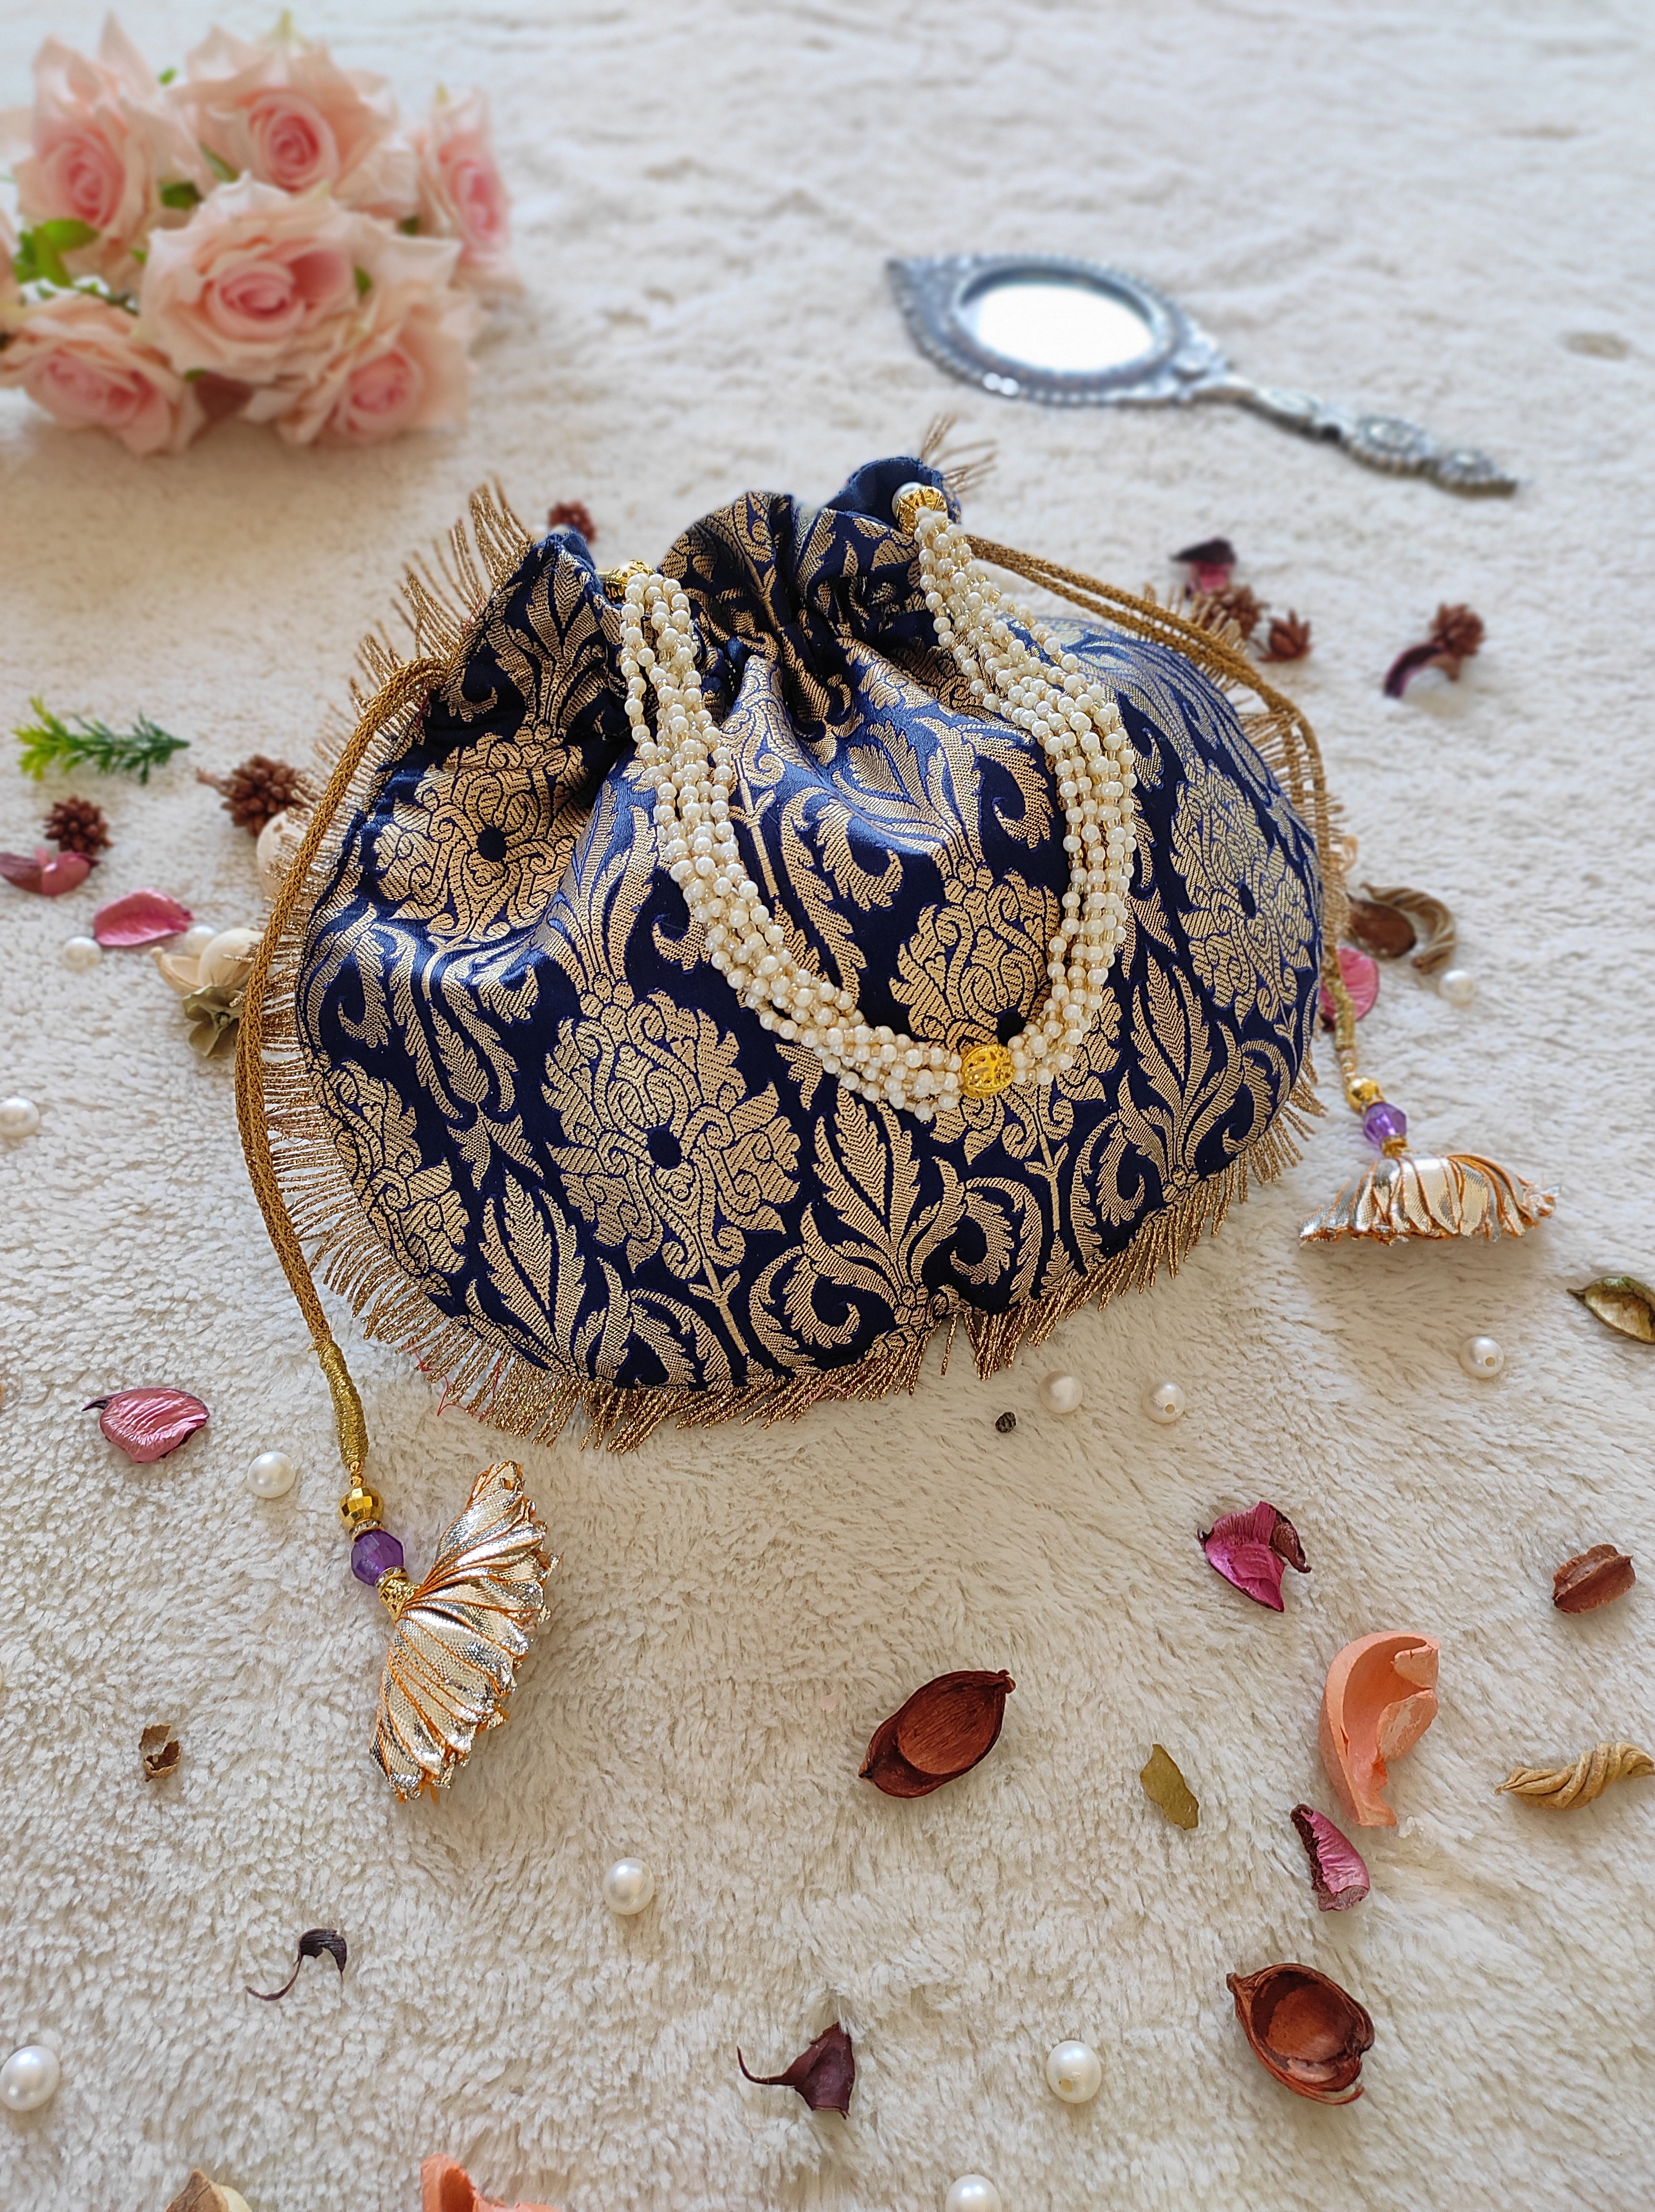 Handbag Selection Guide to Complement Ethnic Wear